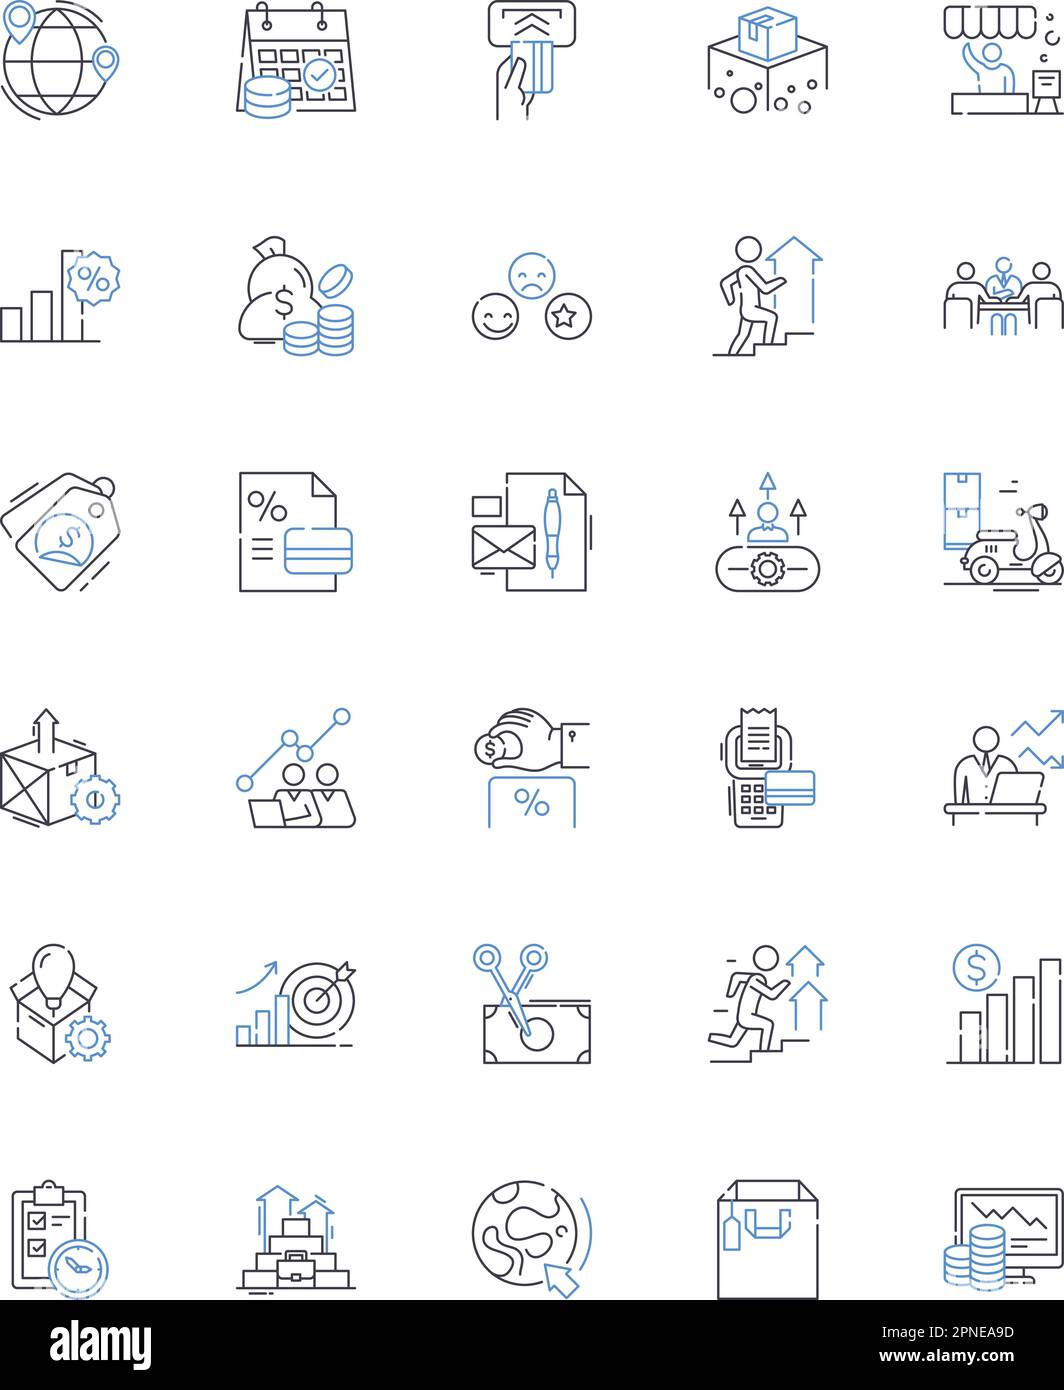 Gain and earnings line icons collection. Profit, Revenue, Income, Return, Gains, Yield, Benefit vector and linear illustration. Reward,Earn,Accumulate Stock Vector